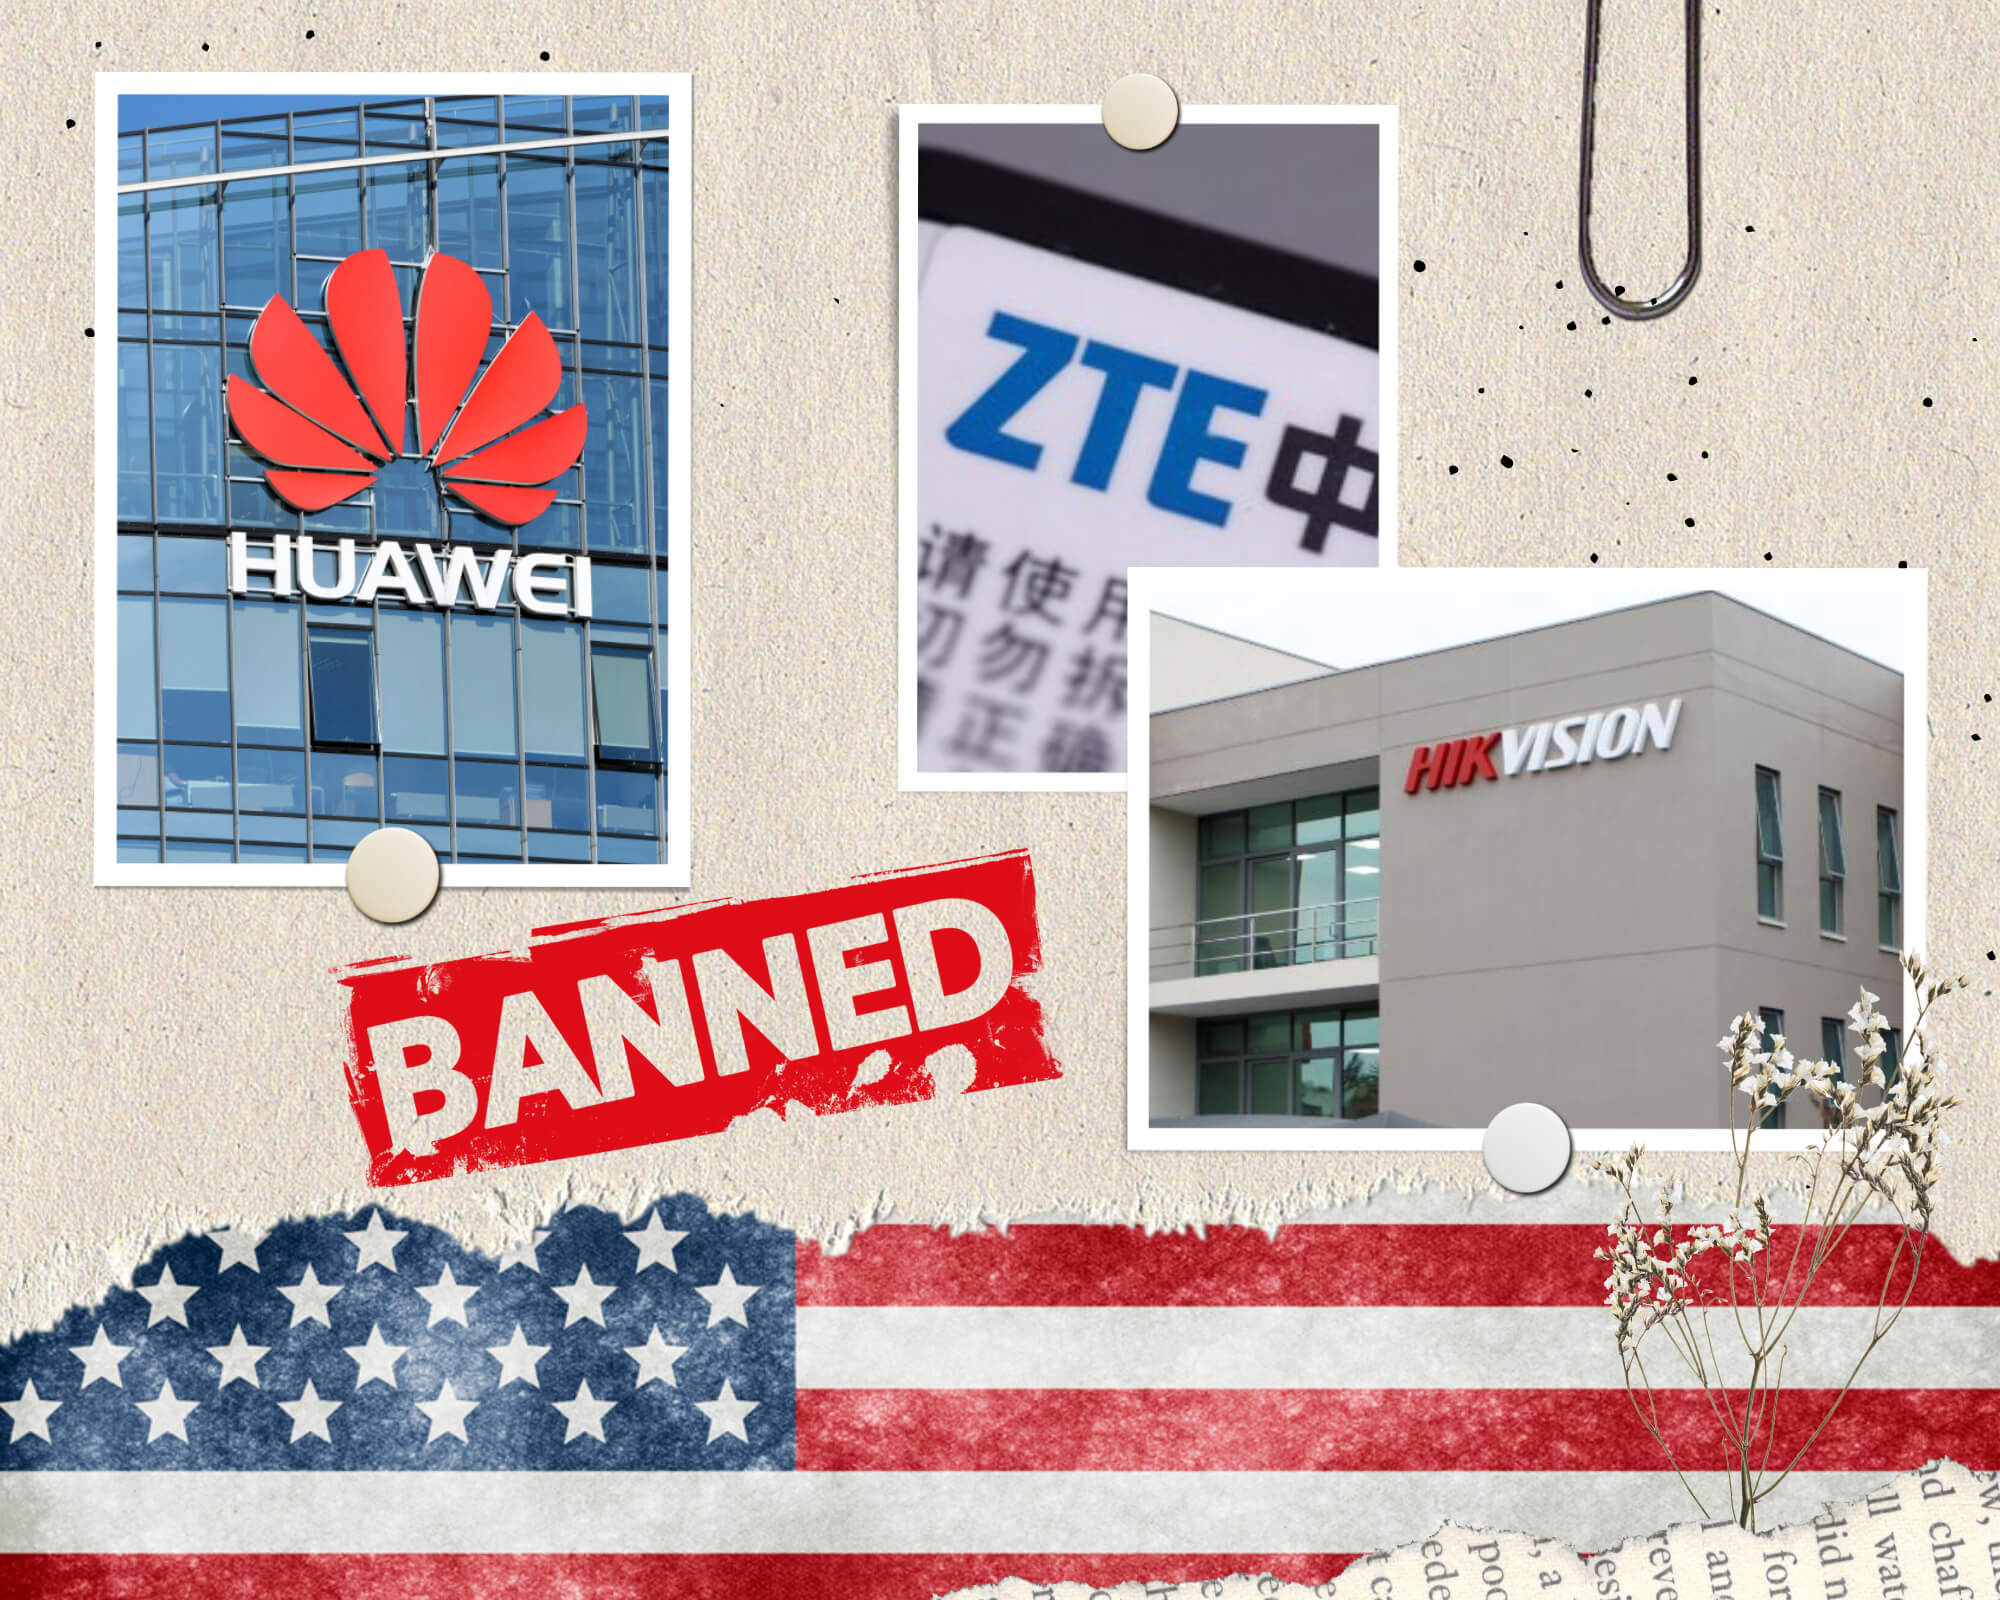 The US government has taken action to ban the use of Huawei, ZTE, and Hikvision technology in certain situations over fears of unacceptable spying.